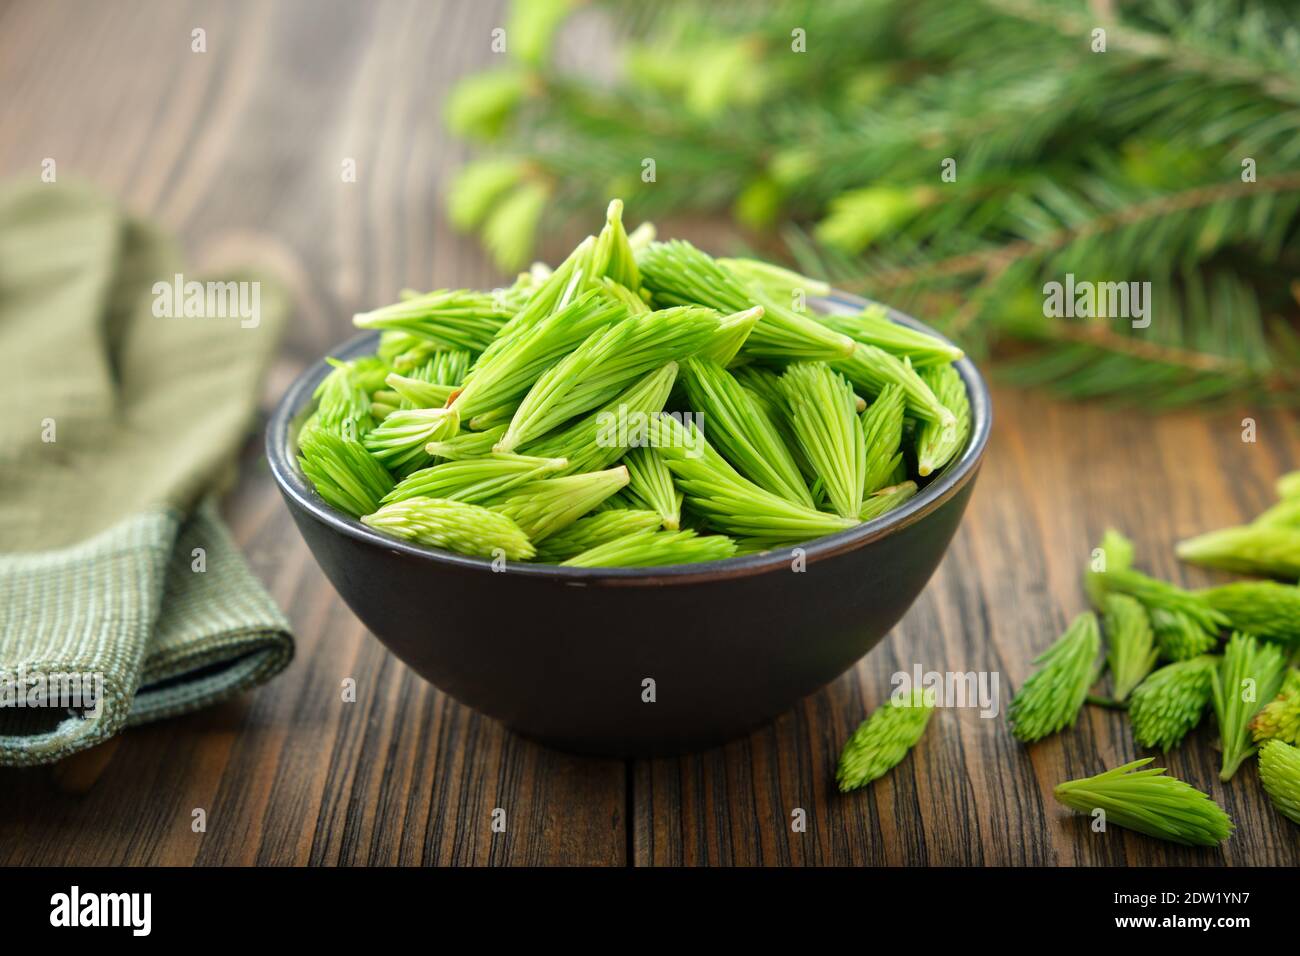 Spruce tips in a black bowl. Fir buds and needles, twigs of fir tree on wooden table. Stock Photo